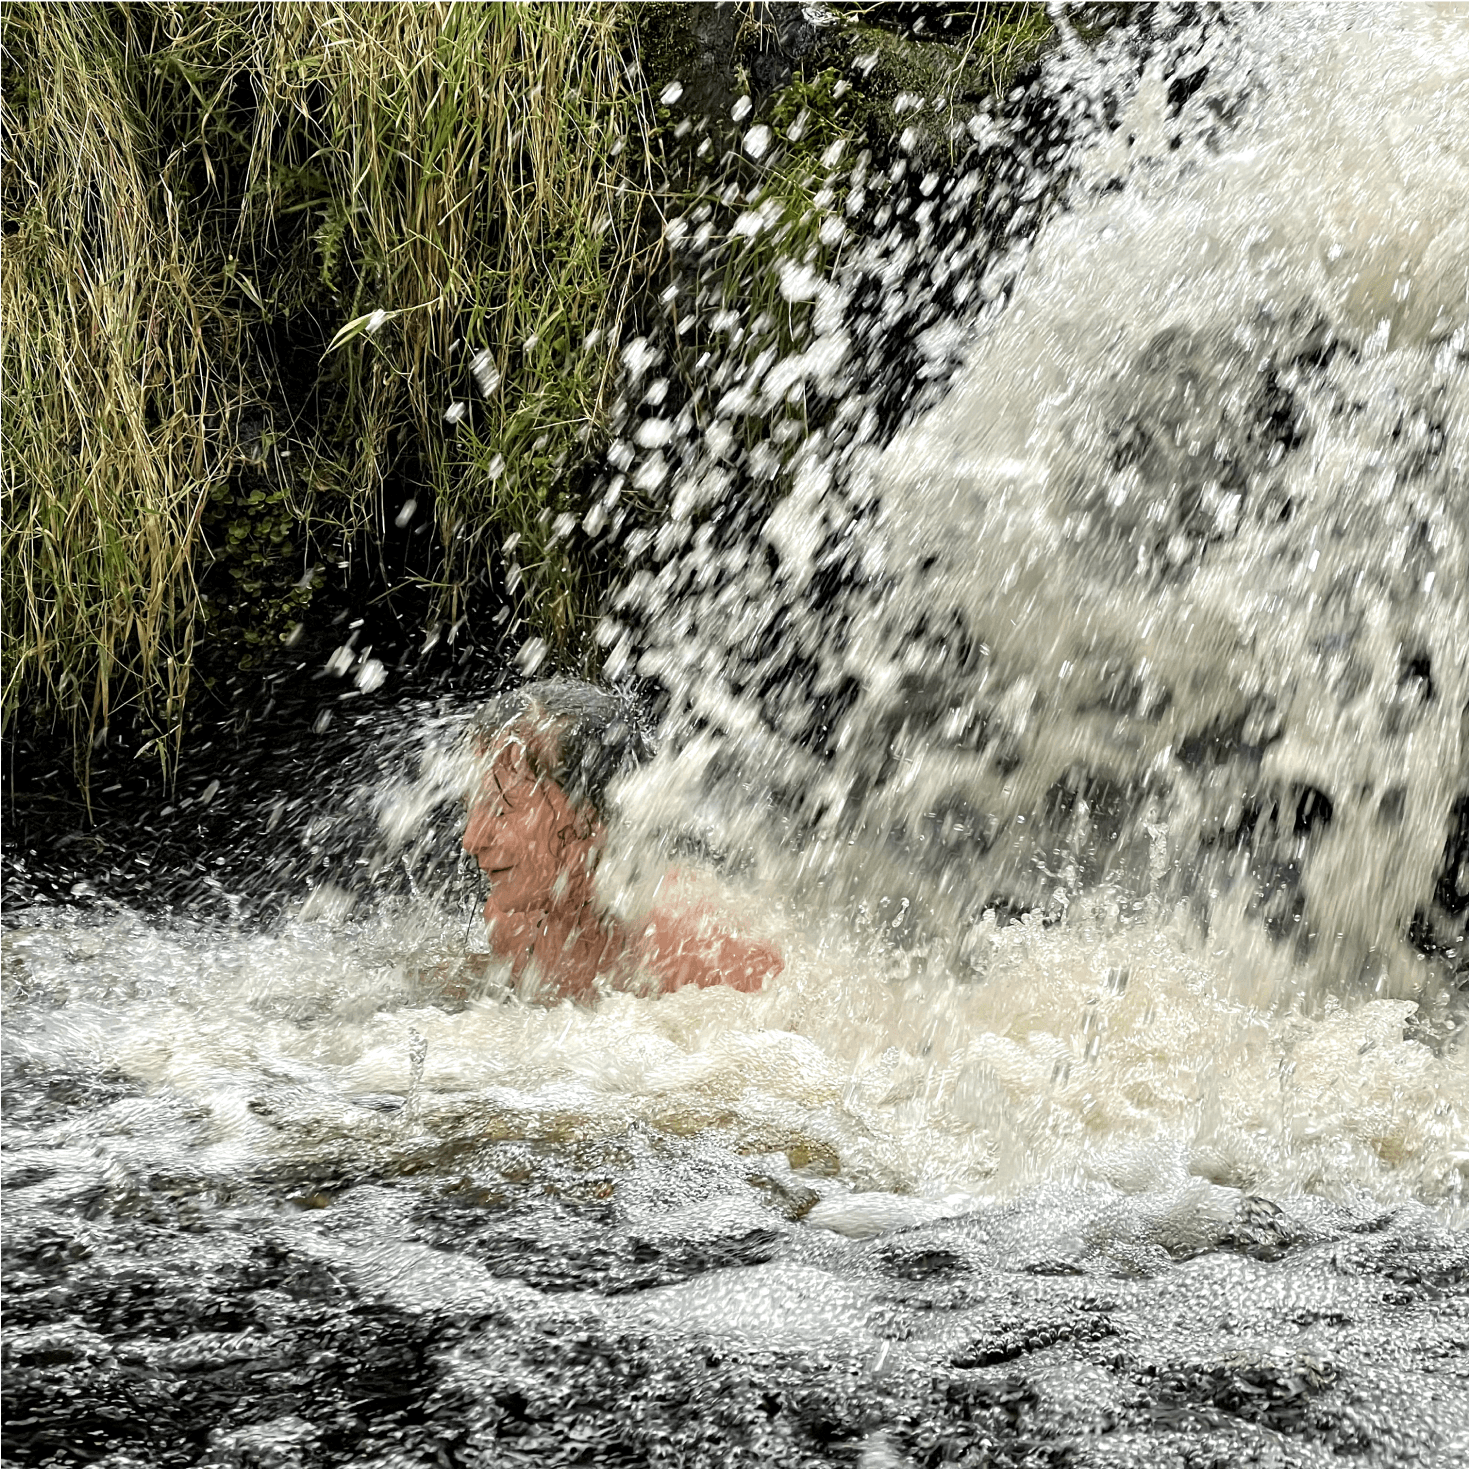 Member of the team inside a waterfall